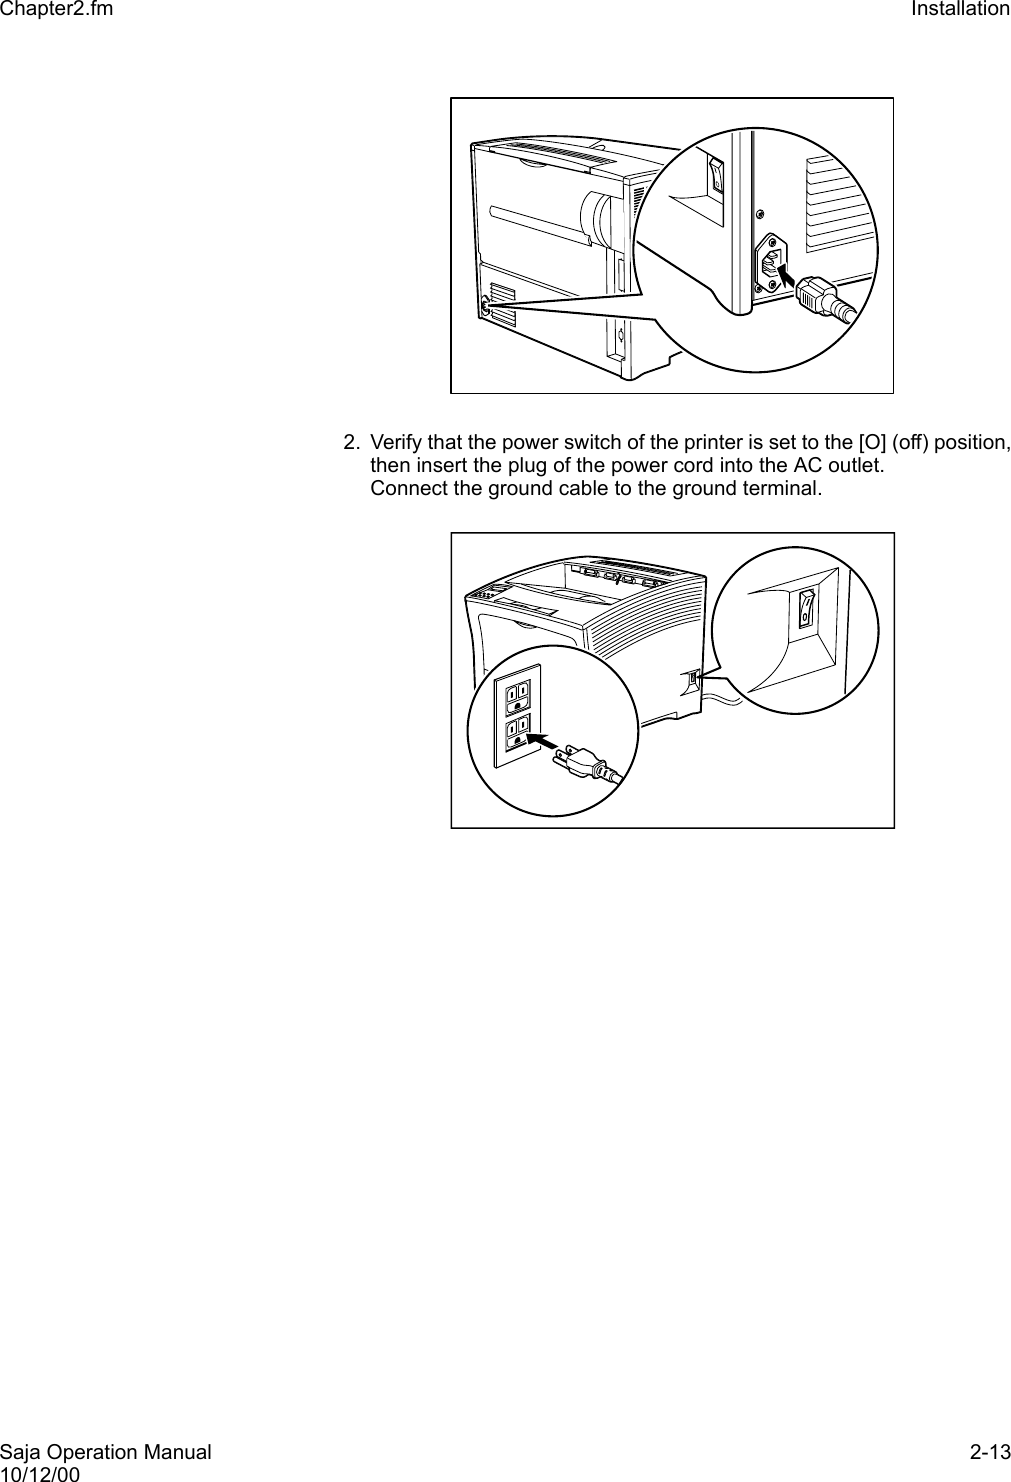 Saja Operation Manual 2-1310/12/00Chapter2.fm Installation2. Verify that the power switch of the printer is set to the [O] (off) position,then insert the plug of the power cord into the AC outlet.Connect the ground cable to the ground terminal. 